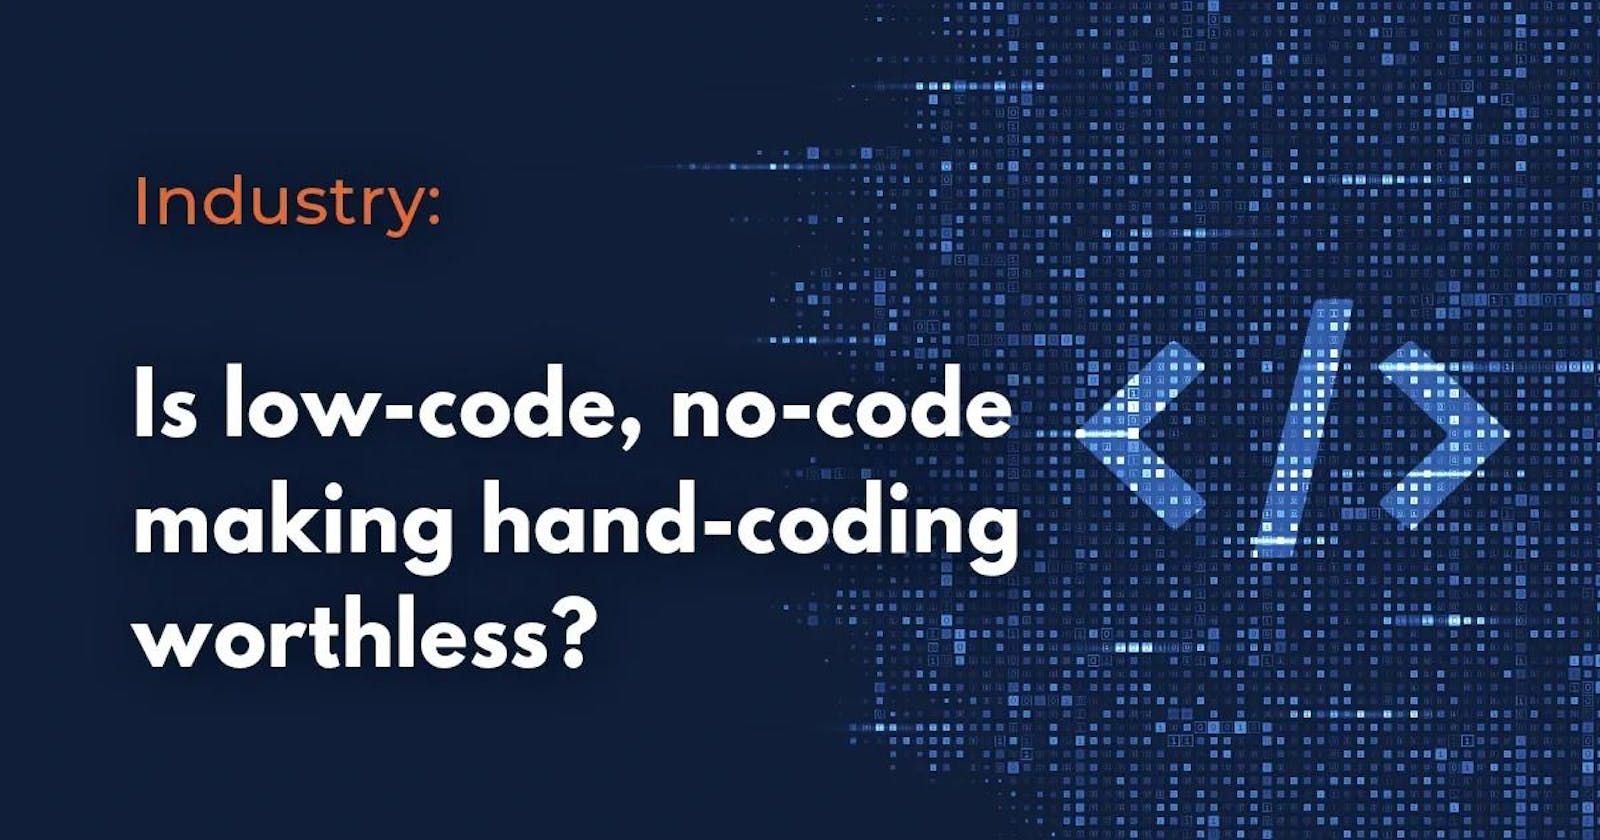 No-code, Low-code, and Coding